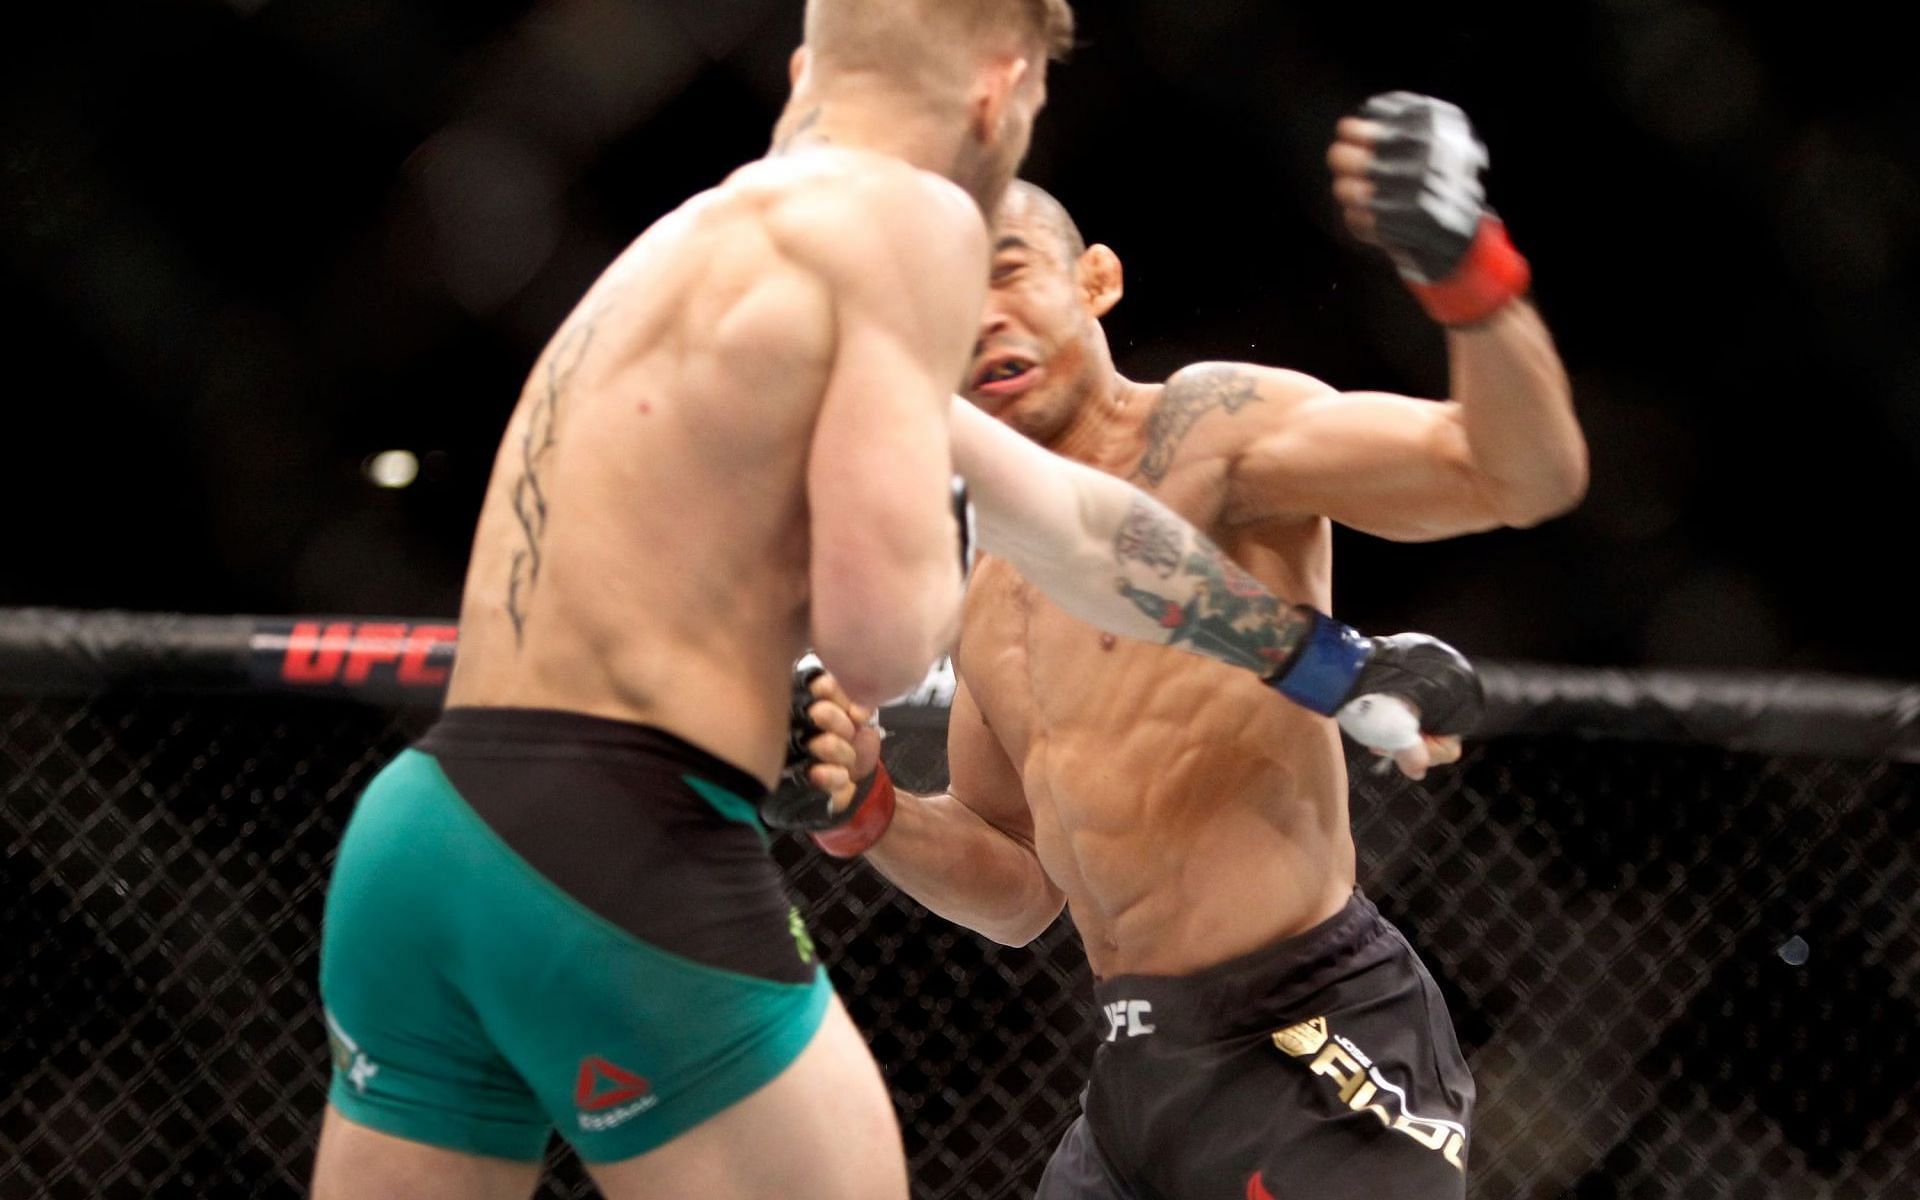 Conor McGregor knocked out Jose Aldo in their famous bout in 2015